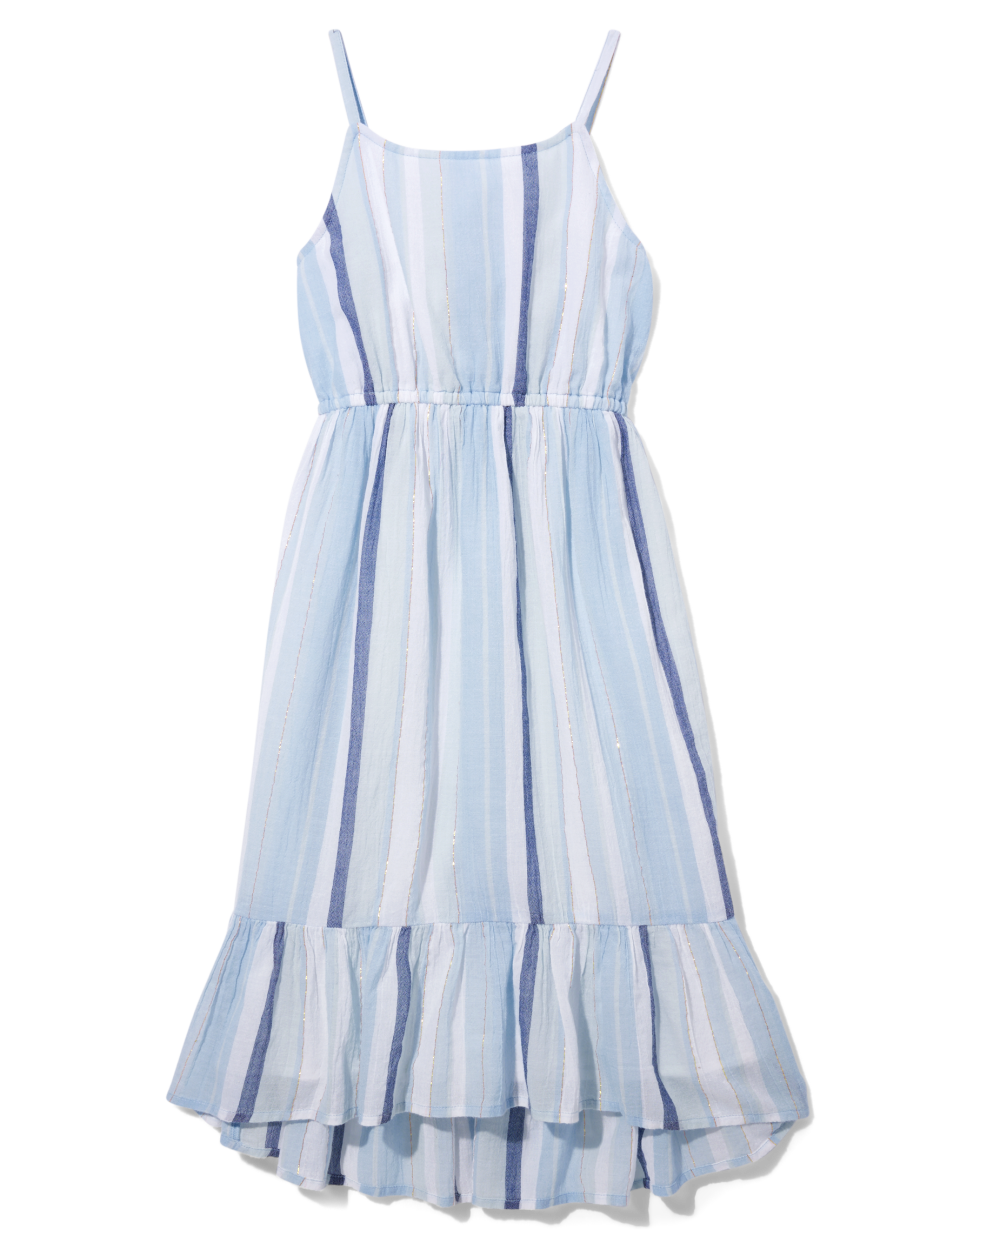 Girls Striped Print Tiered Sleeveless Spaghetti Strap Above the Knee Round Neck Smocked Dress With Ruffles